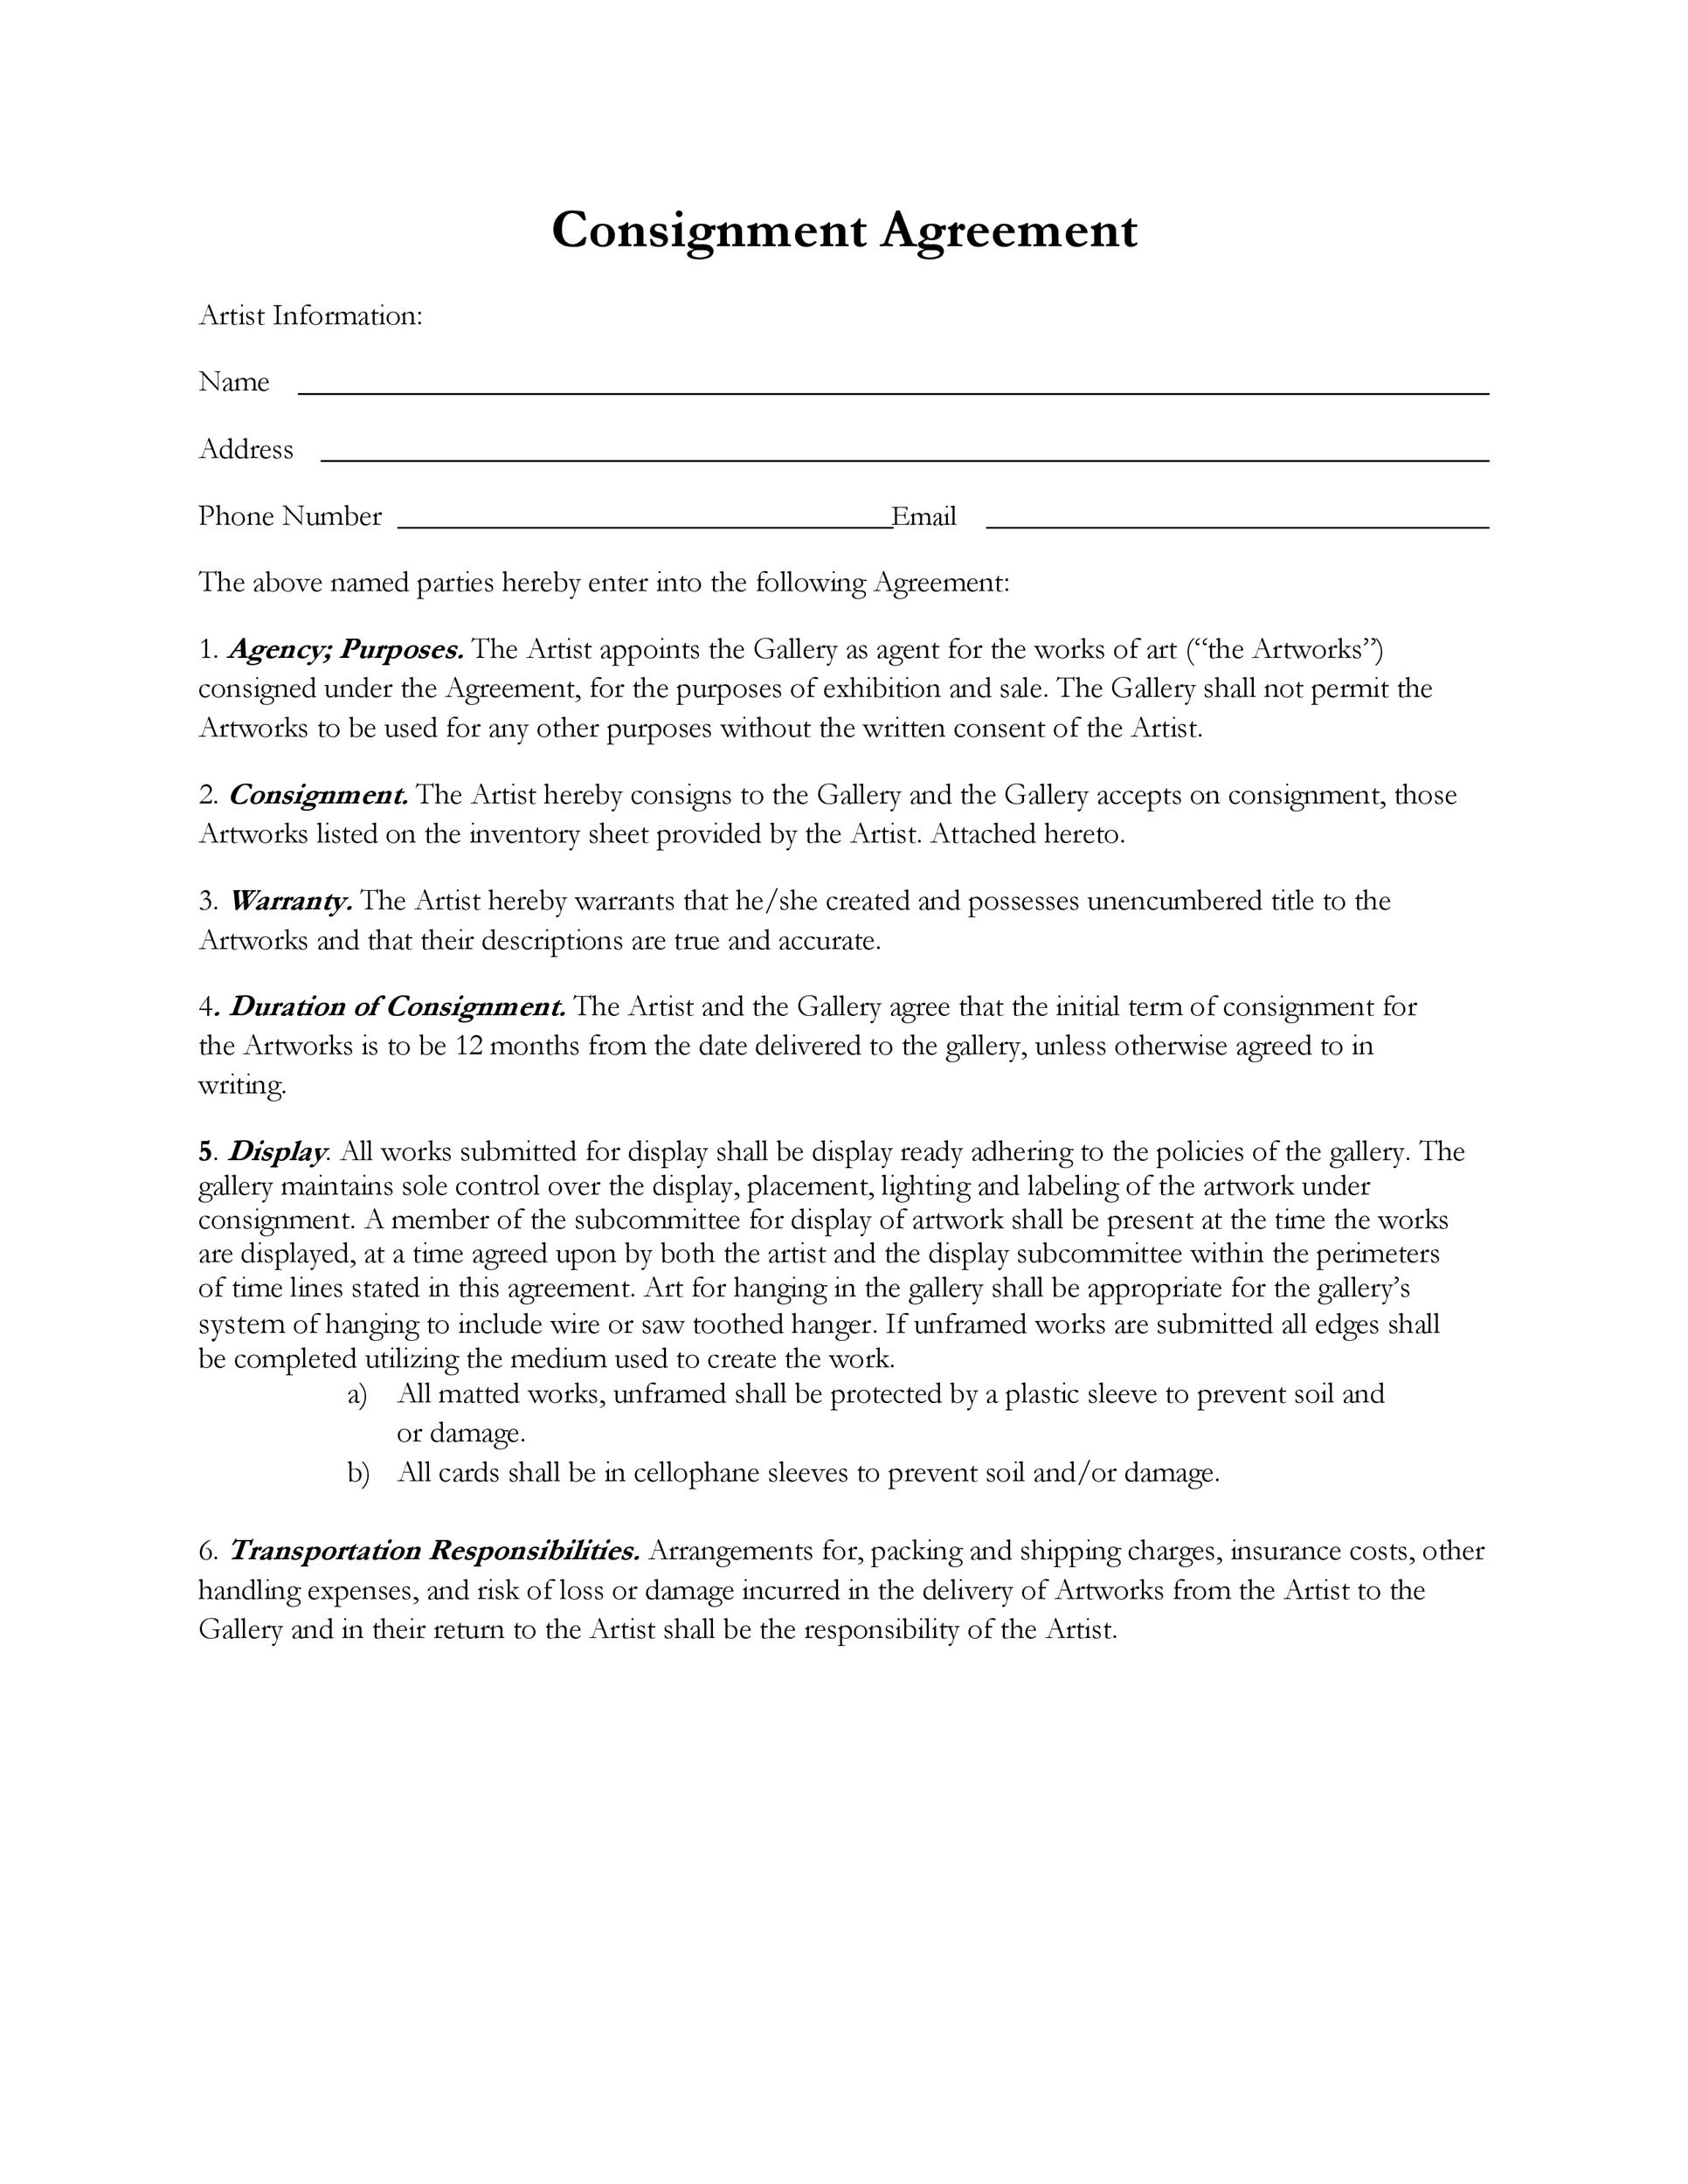 Free Consignment Agreement Template 21